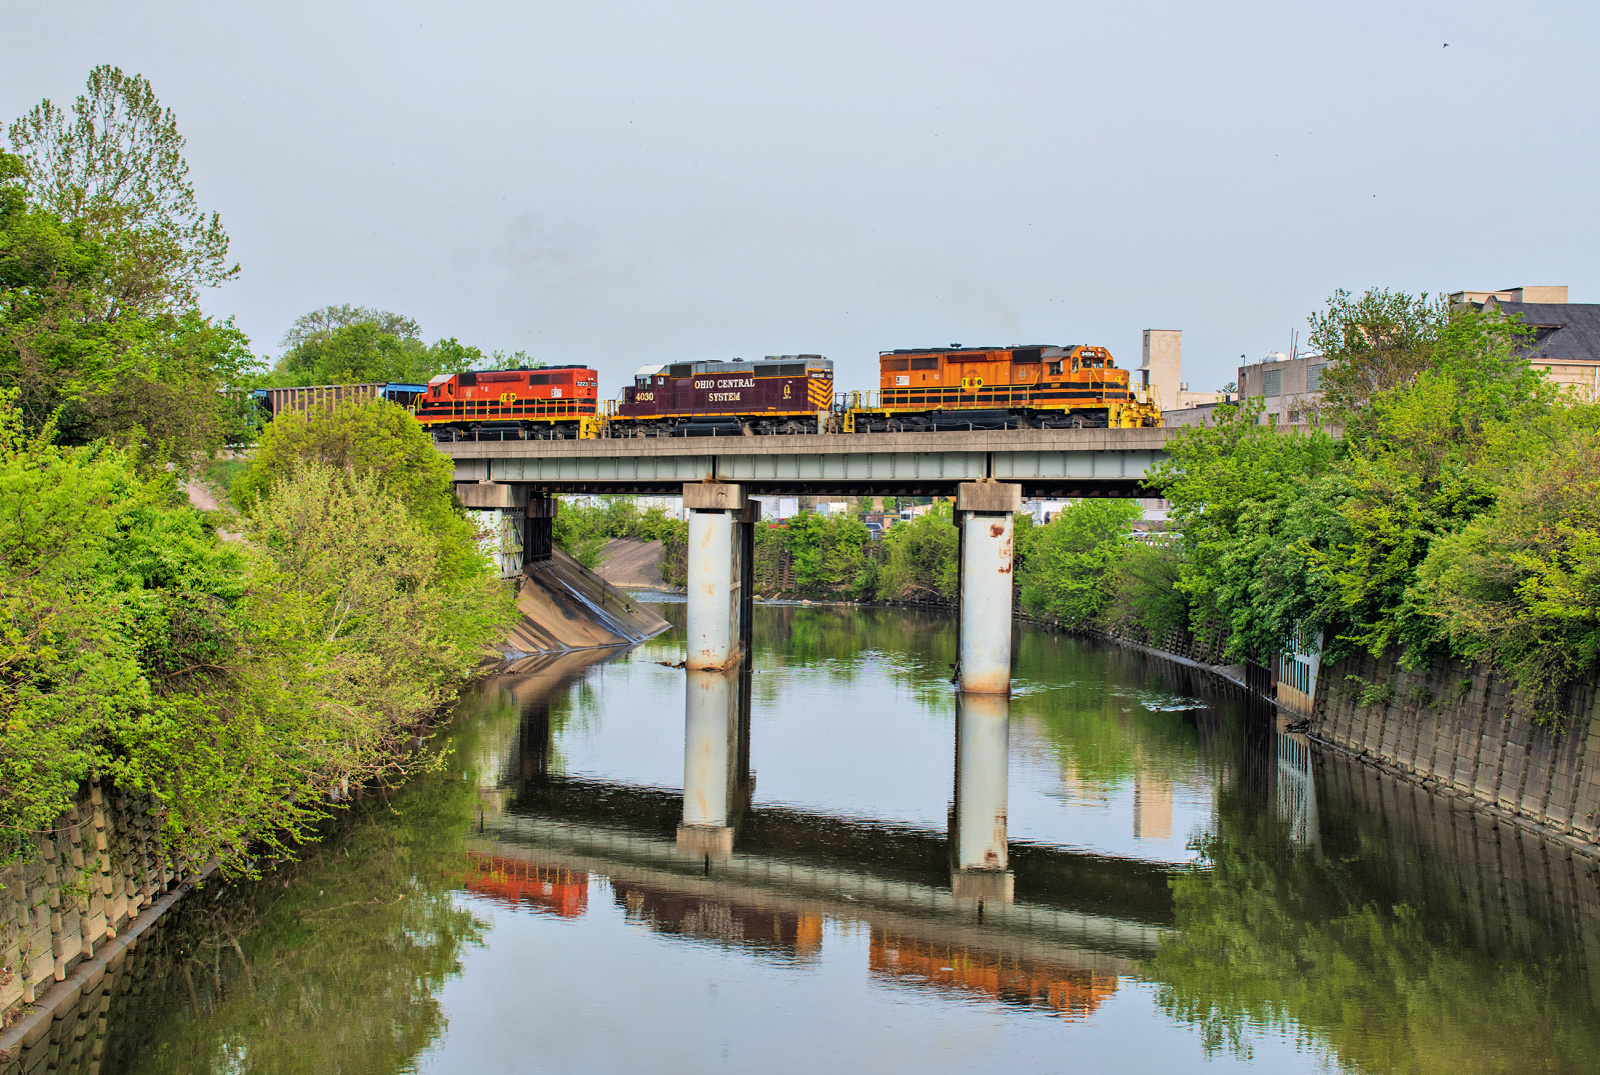 IORY 3494 is a class EMD SD40-2 and  is pictured in Cincinnati, OH, United States.  This was taken along the CSX Cincinnati Terminal Subdivision on the Indiana and Ohio Railway. Photo Copyright: David Rohdenburg uploaded to Railroad Gallery on 04/30/2023. This photograph of IORY 3494 was taken on Saturday, April 29, 2023. All Rights Reserved. 